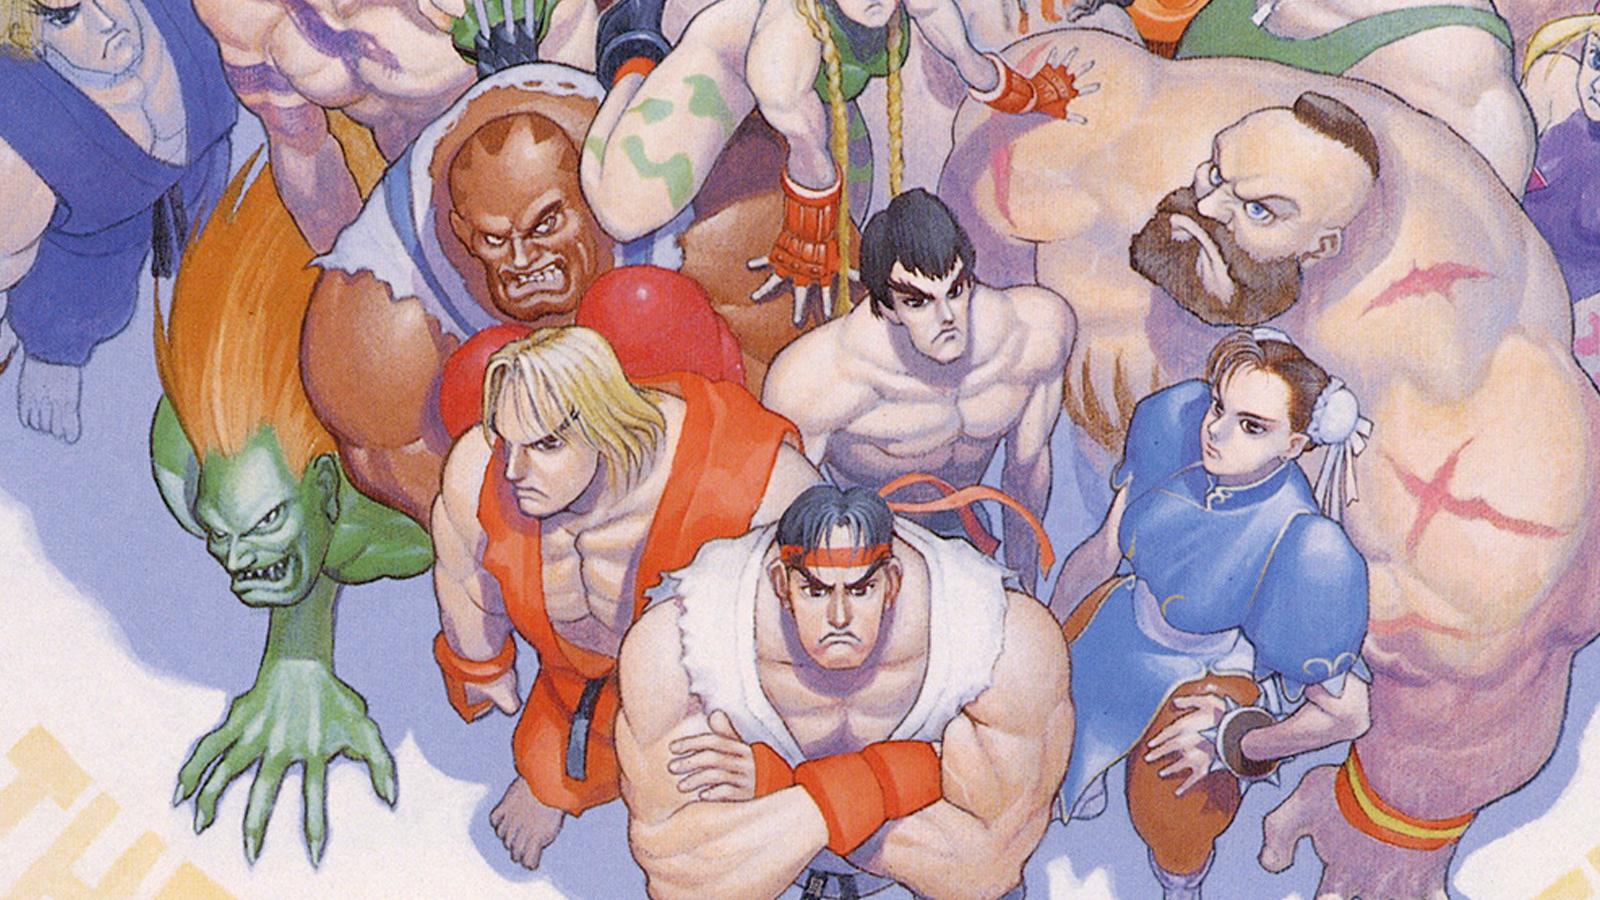 Street Fighter 2 art of characters looking up